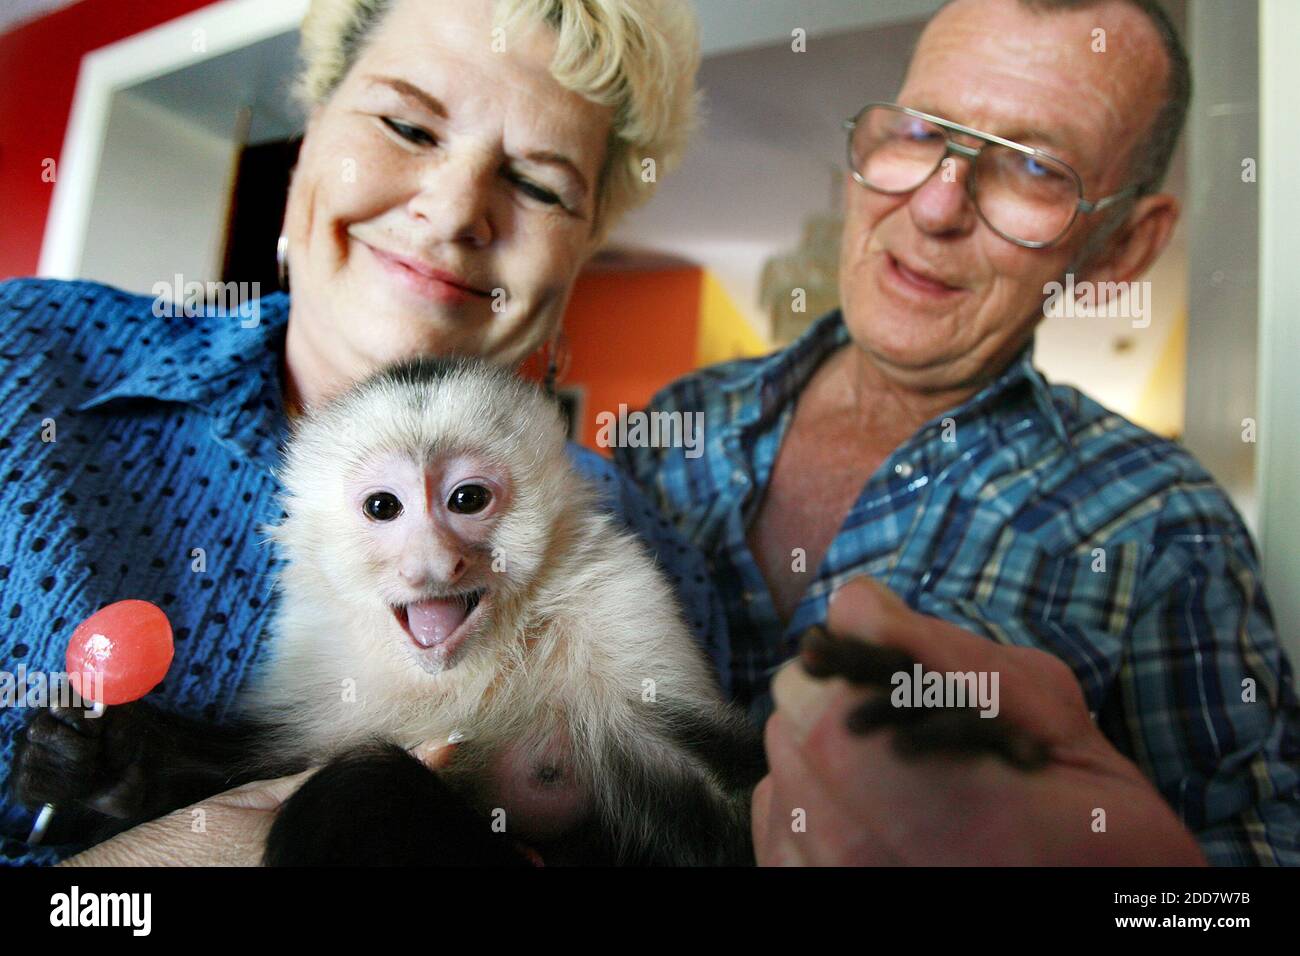 NO FILM, NO VIDEO, NO TV, NO DOCUMENTARY - Lori Johnson and her husband, Jim, sit with Jessica Marie, a pet capuchin monkey, who loves lollipops. Johnson has spent the last 18 years fawning over her pet monkey like it were her baby in Deltona, FL, USA on April 13, 2008. Photo by Roberto Gonzalez/Orlando Sentinel/MCT/ABACAPRESS.COM Stock Photo